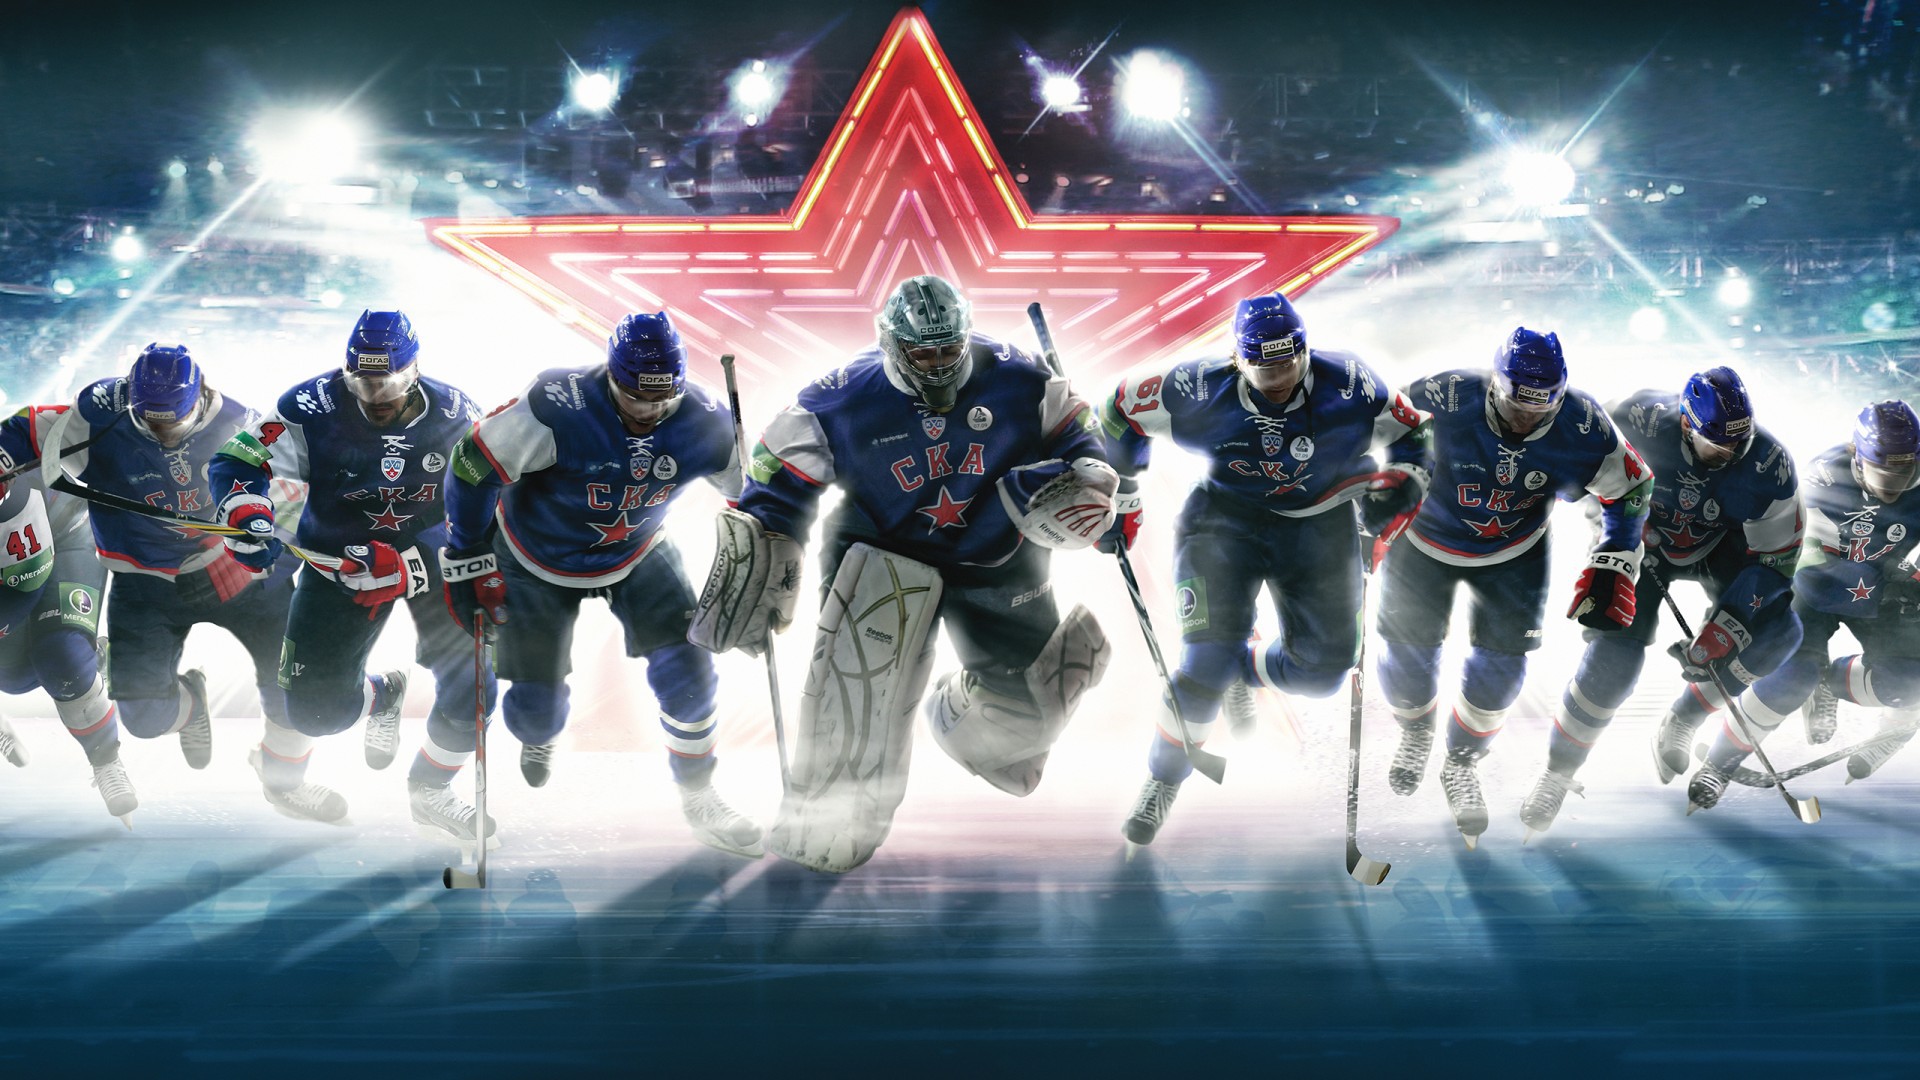 Hockey Team Wallpaper And Image Pictures Photos